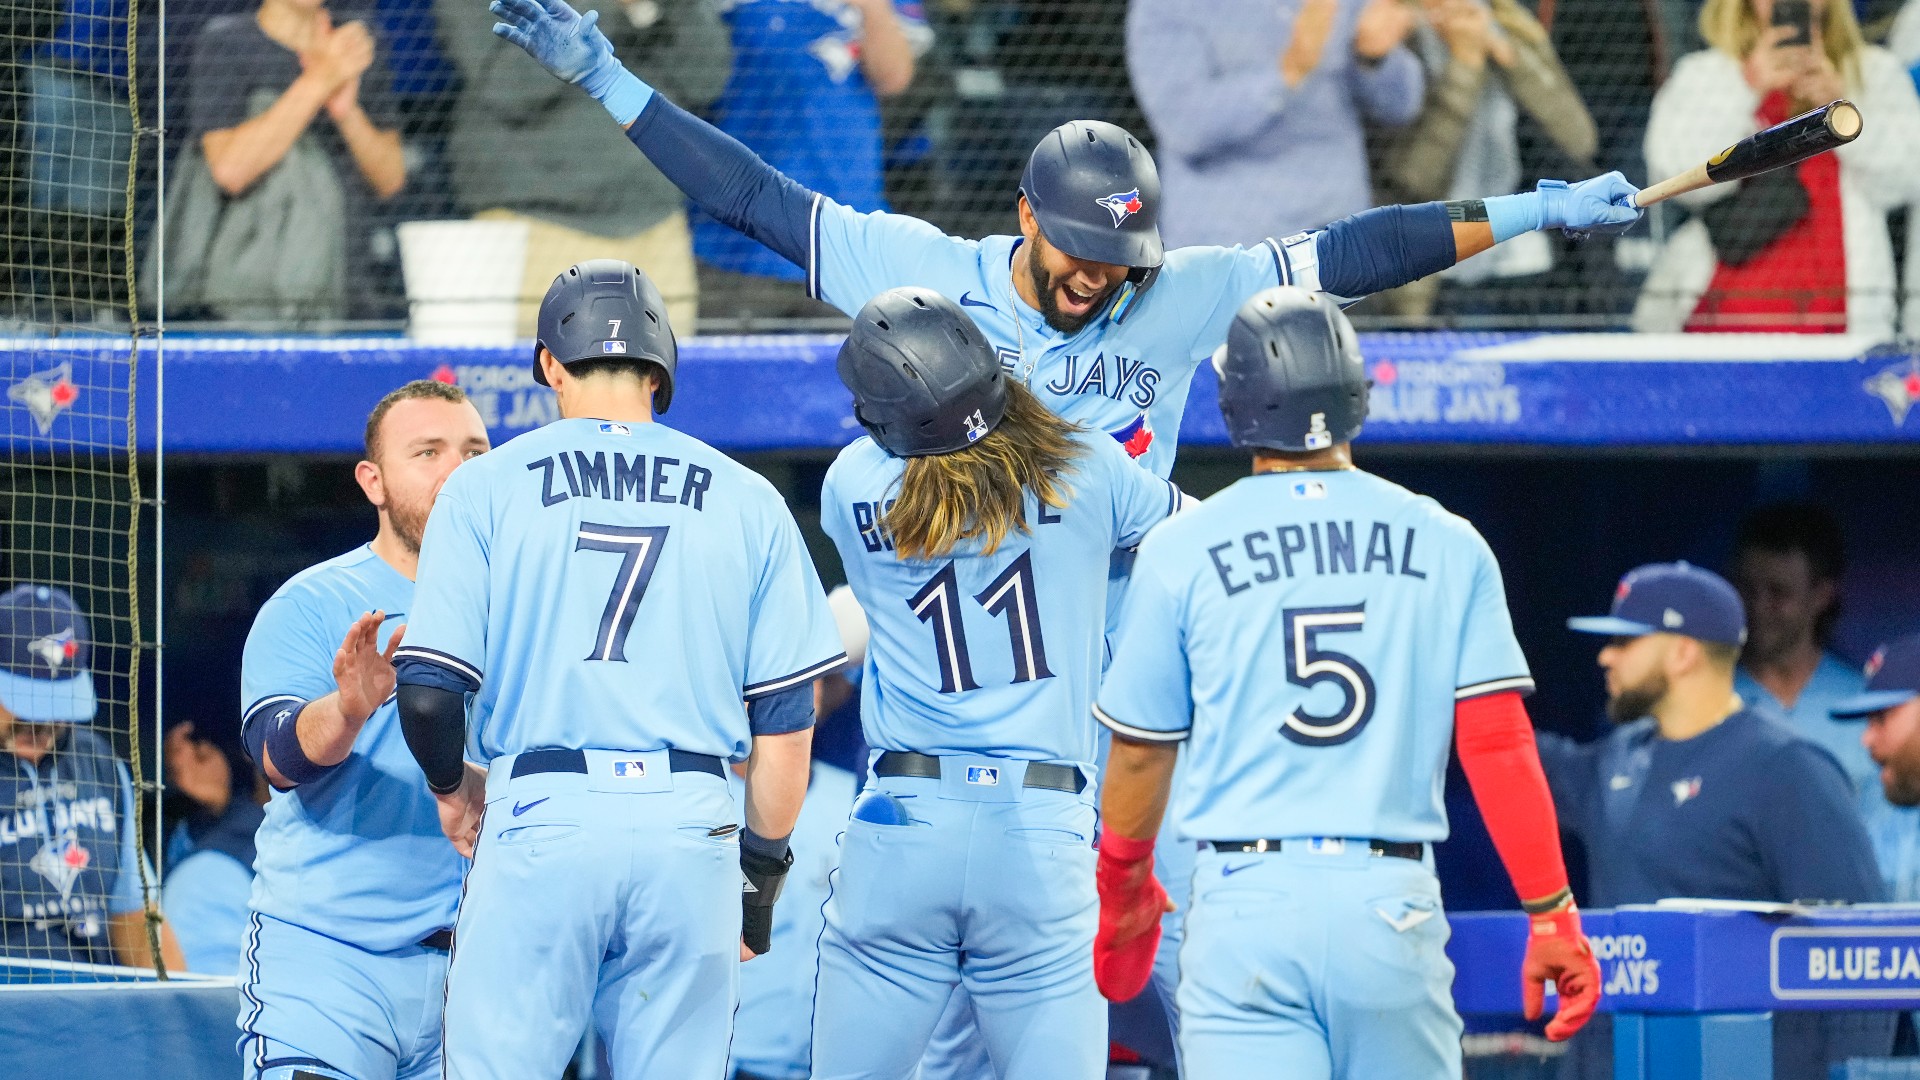 Red Sox vs. Blue Jays Betting Odds, Picks: Expect Toronto to Dominate article feature image